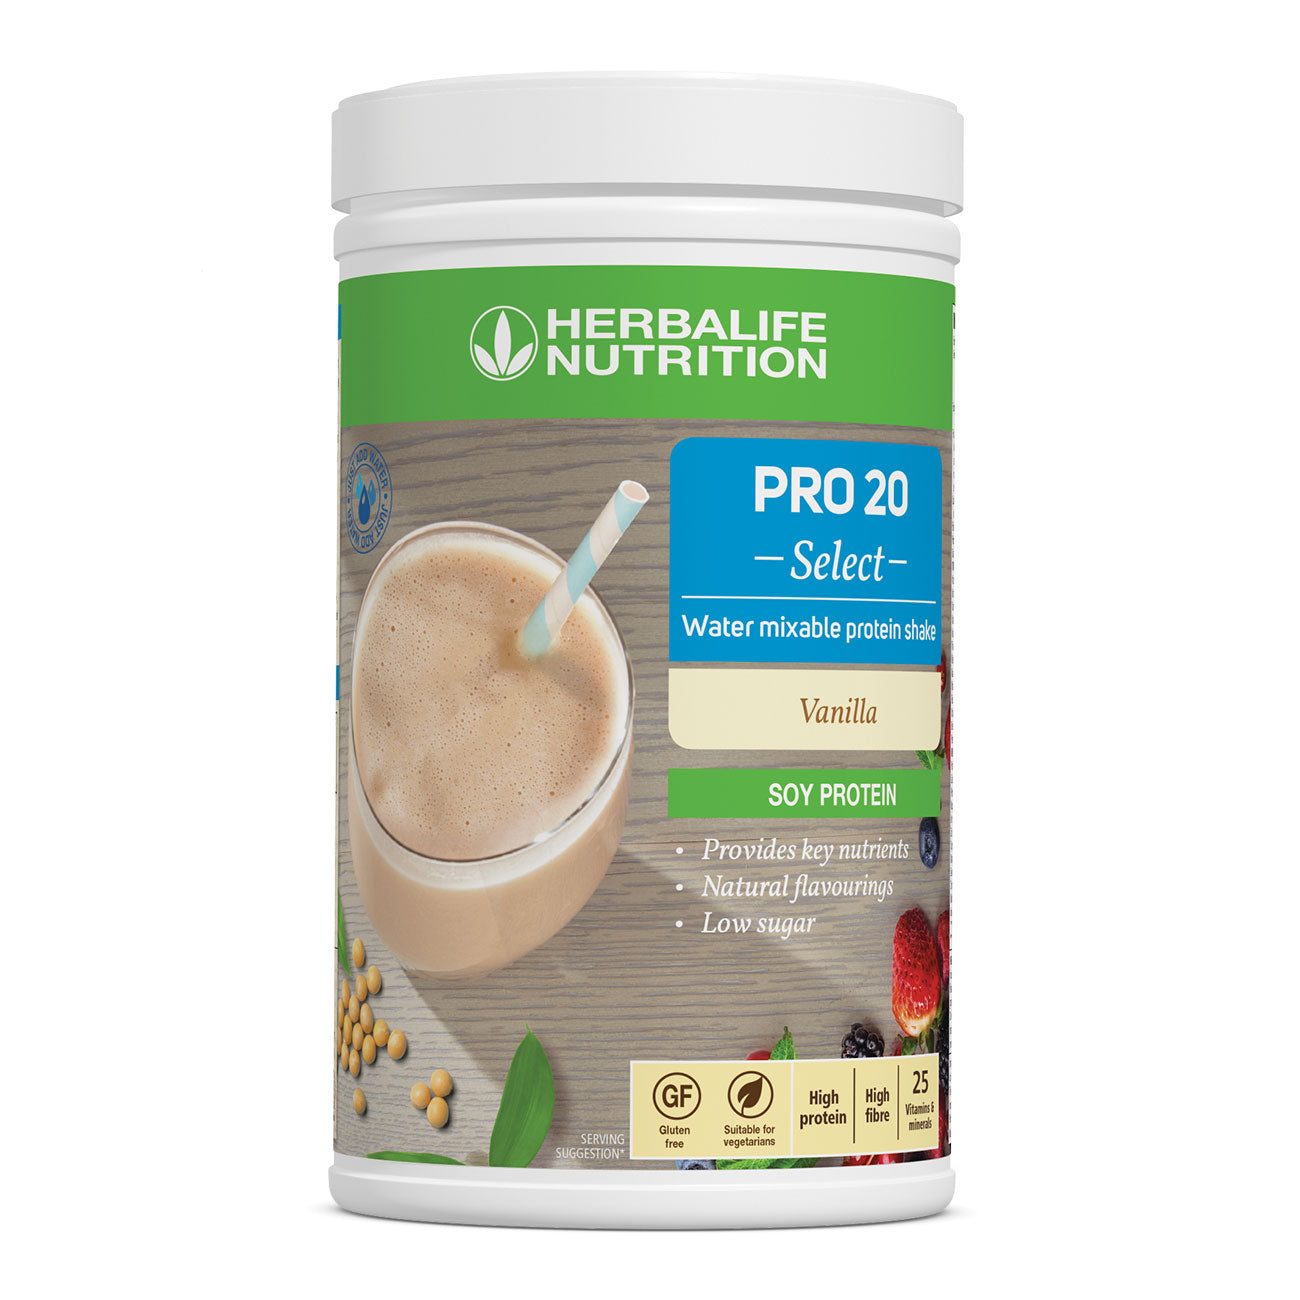 Herbalife Nutrition - Tri Blend Select provides naturally sourced